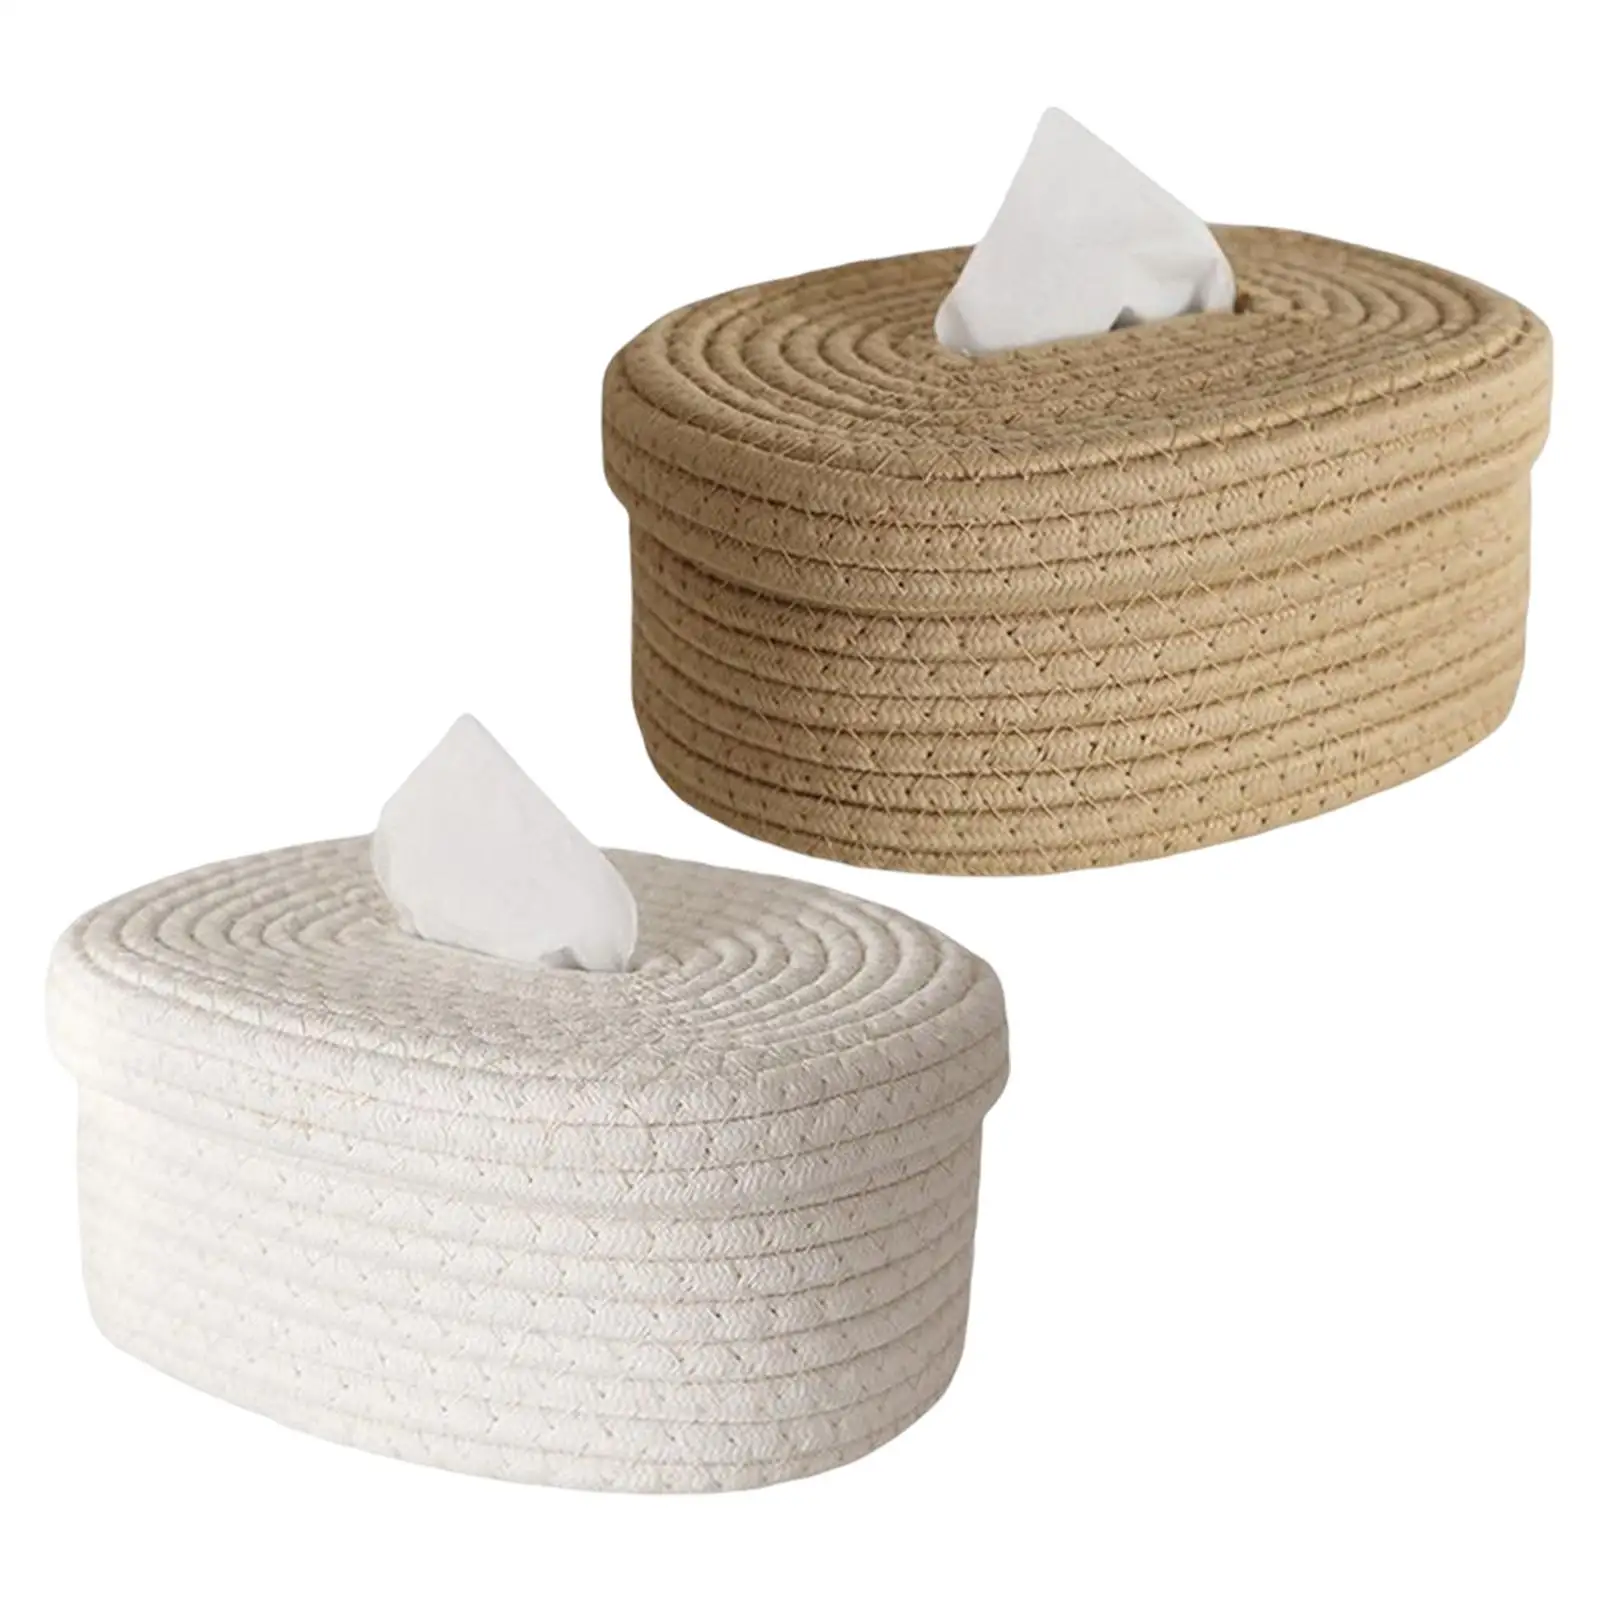 Cotton Rope Woven Napkin Tissues Holder Organizer 8.3x6.5x4.2inch Functional